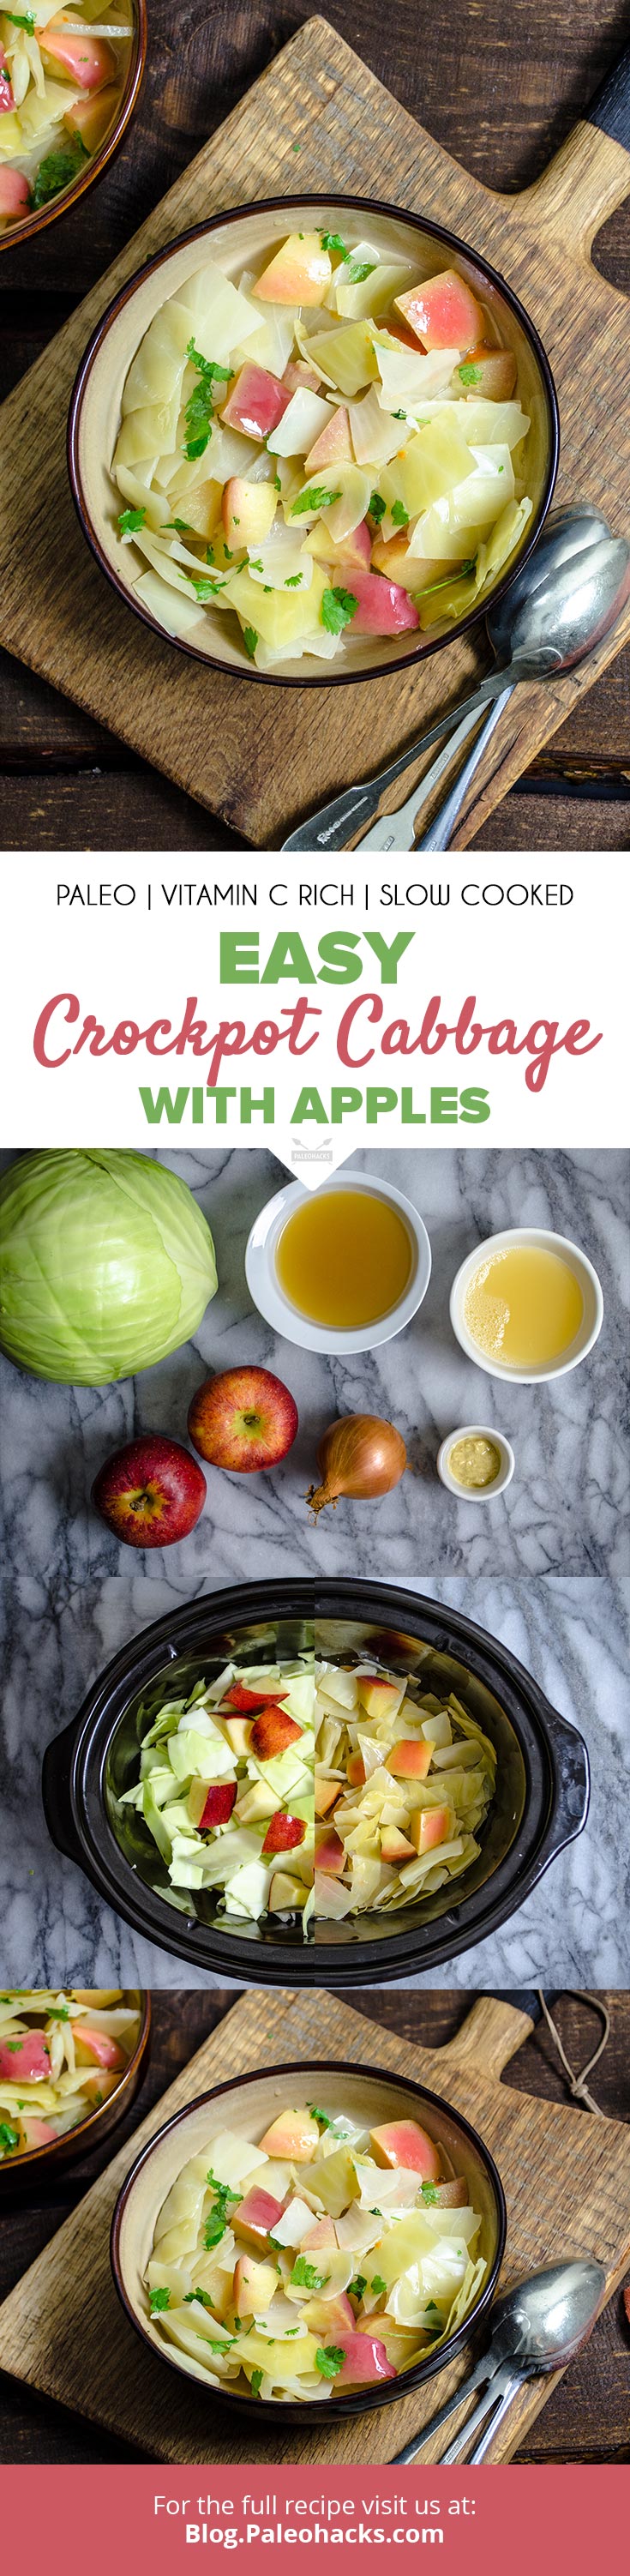 Relax and let the crockpot do all the work in this sweet and tart recipe for slow-cooked cabbage and apples.